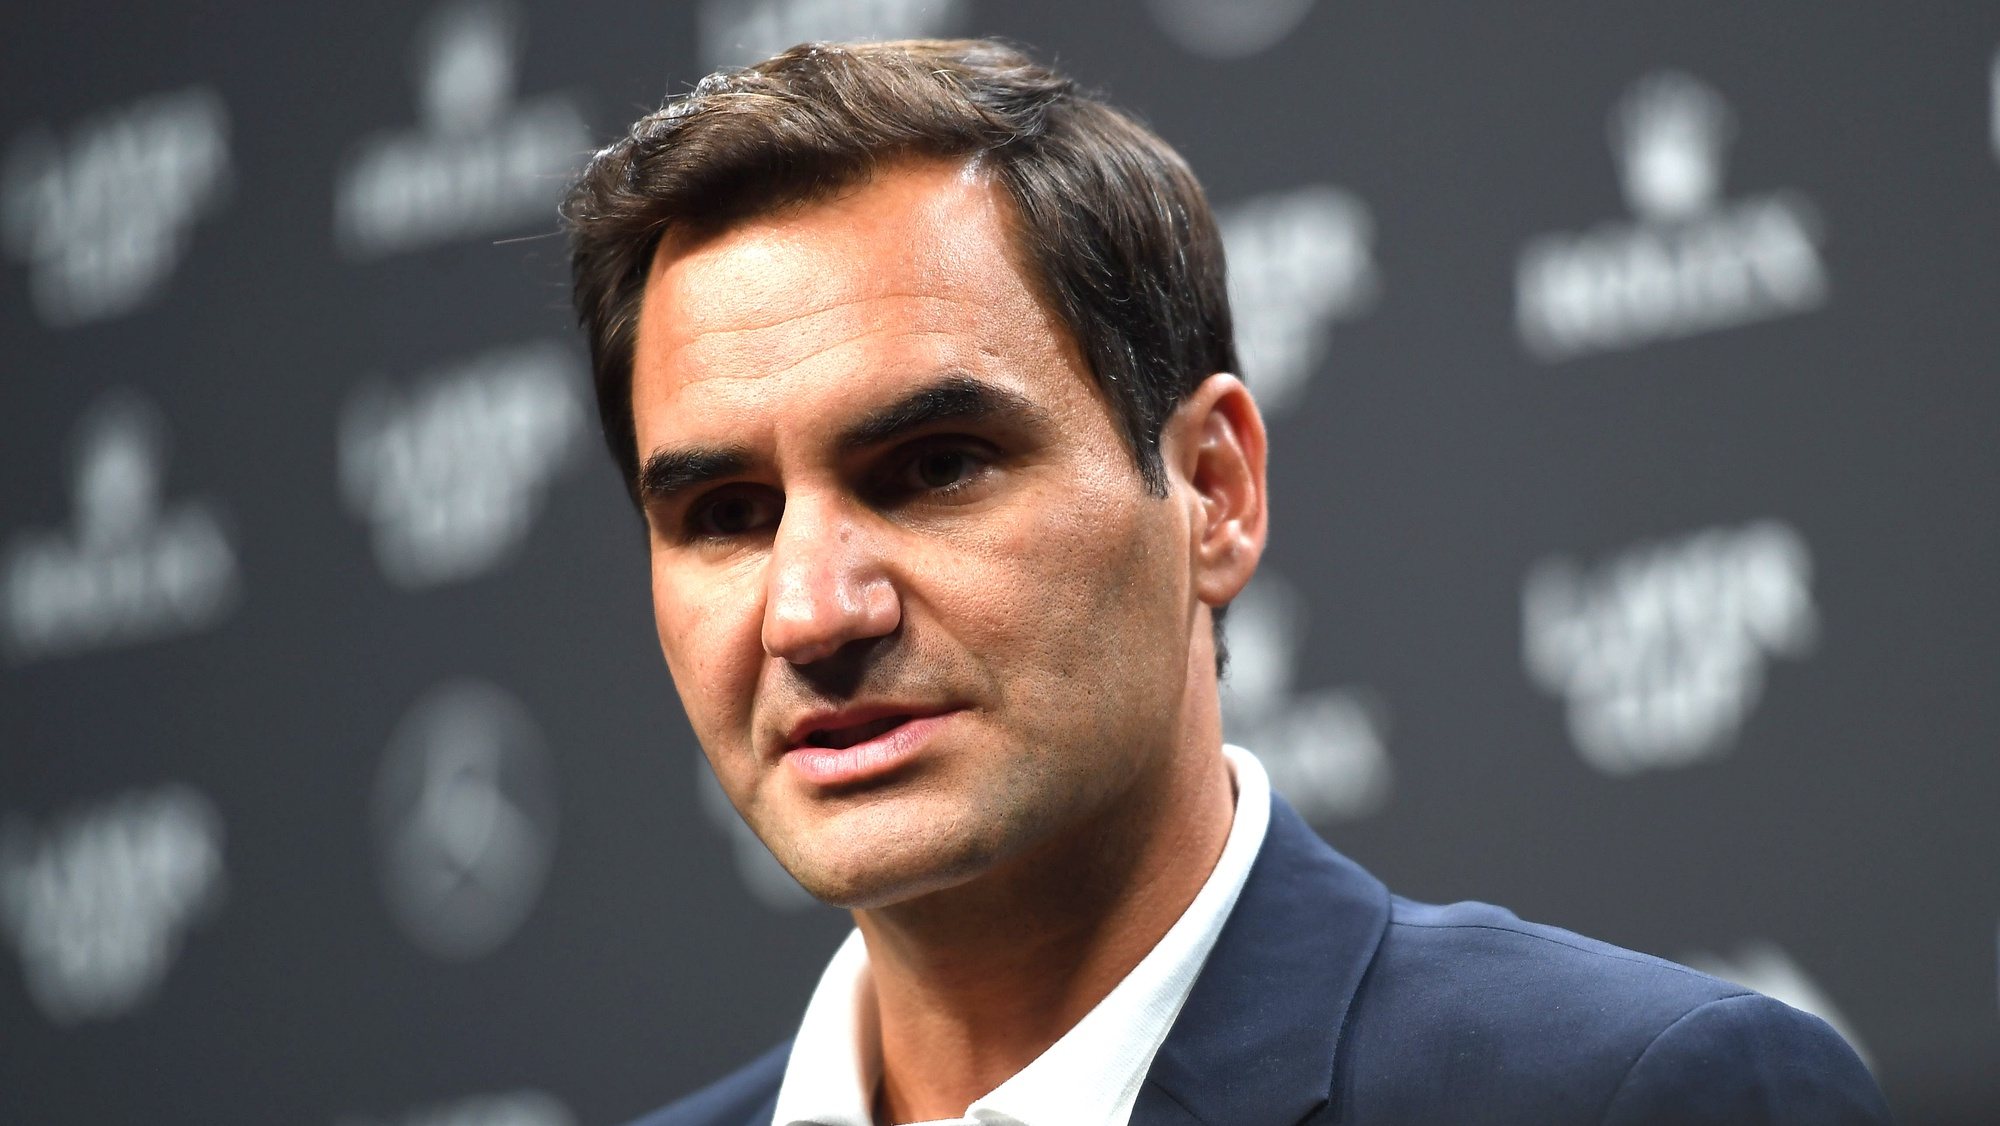 epa10196536 Roger Federer of Switzerland during a press conference in London, Britain, 21 September 2022, ahead of the Laver Cup tennis tournament starting on 23 September. On 15 September, Federer announced his retirement from professional tennis with the Laver Cup his last tournament he will play in.  EPA/ANDY RAIN